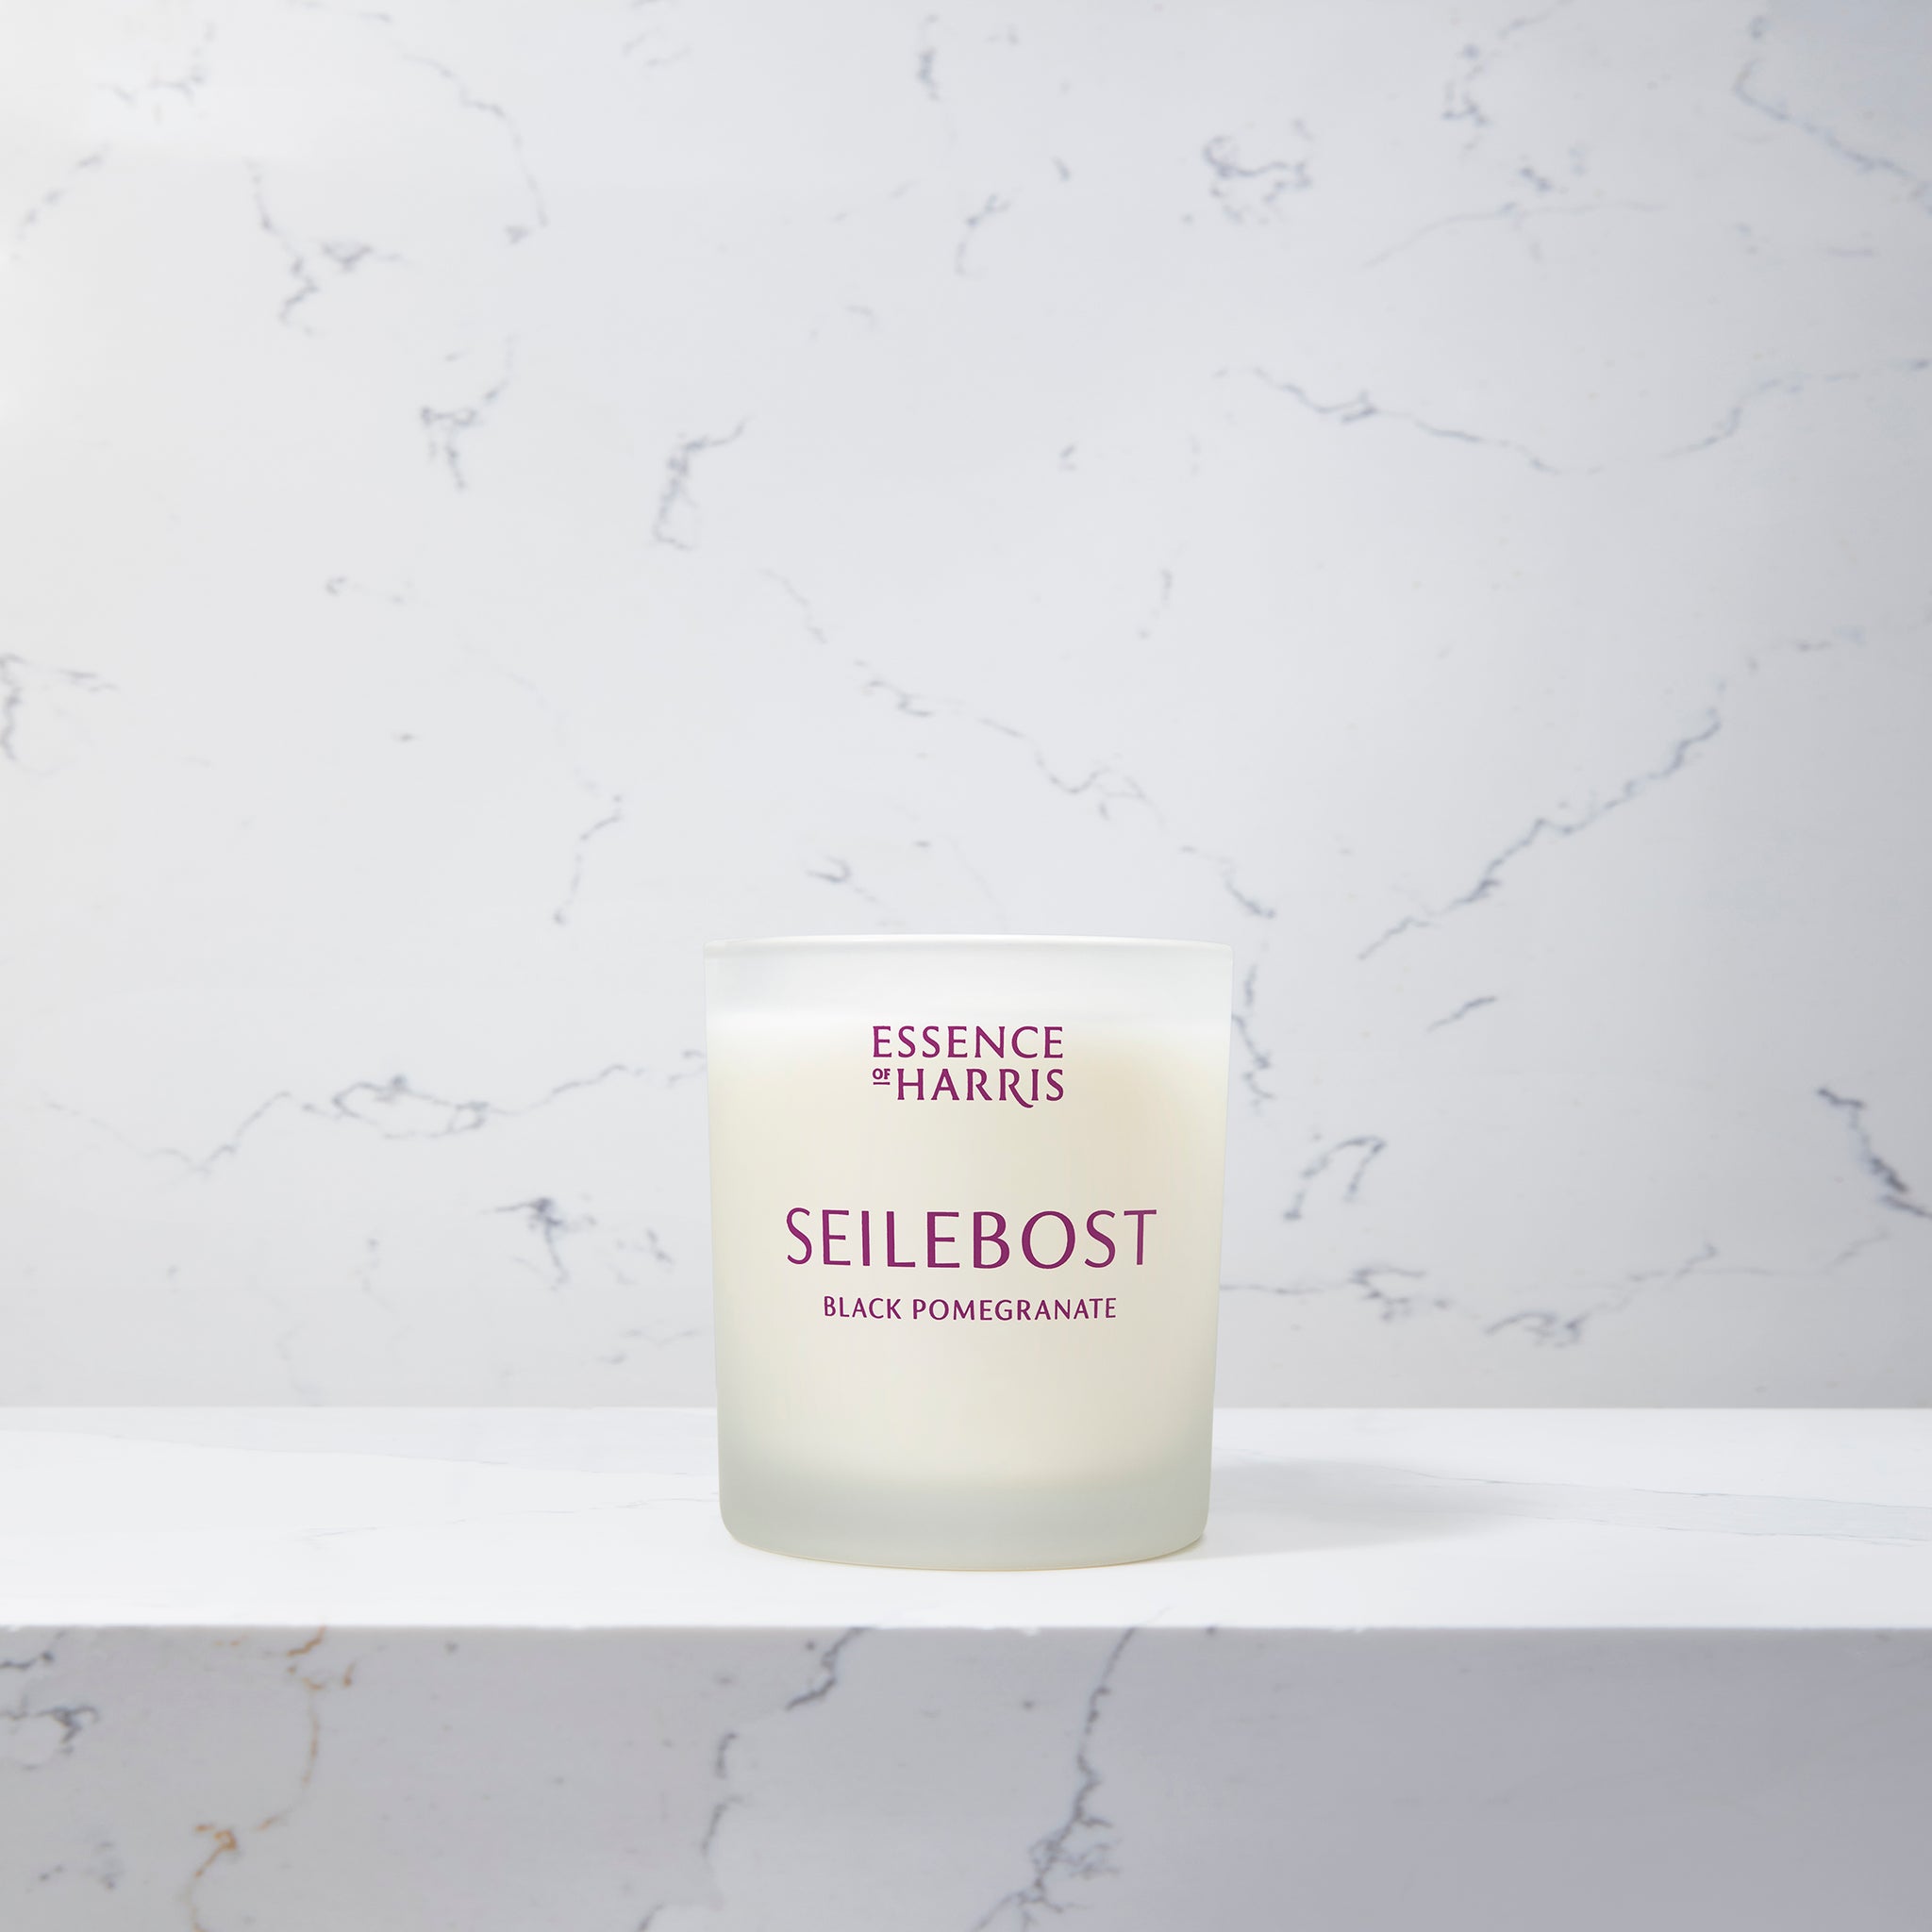 Seilebost, black pomegranate scented soy wax candle